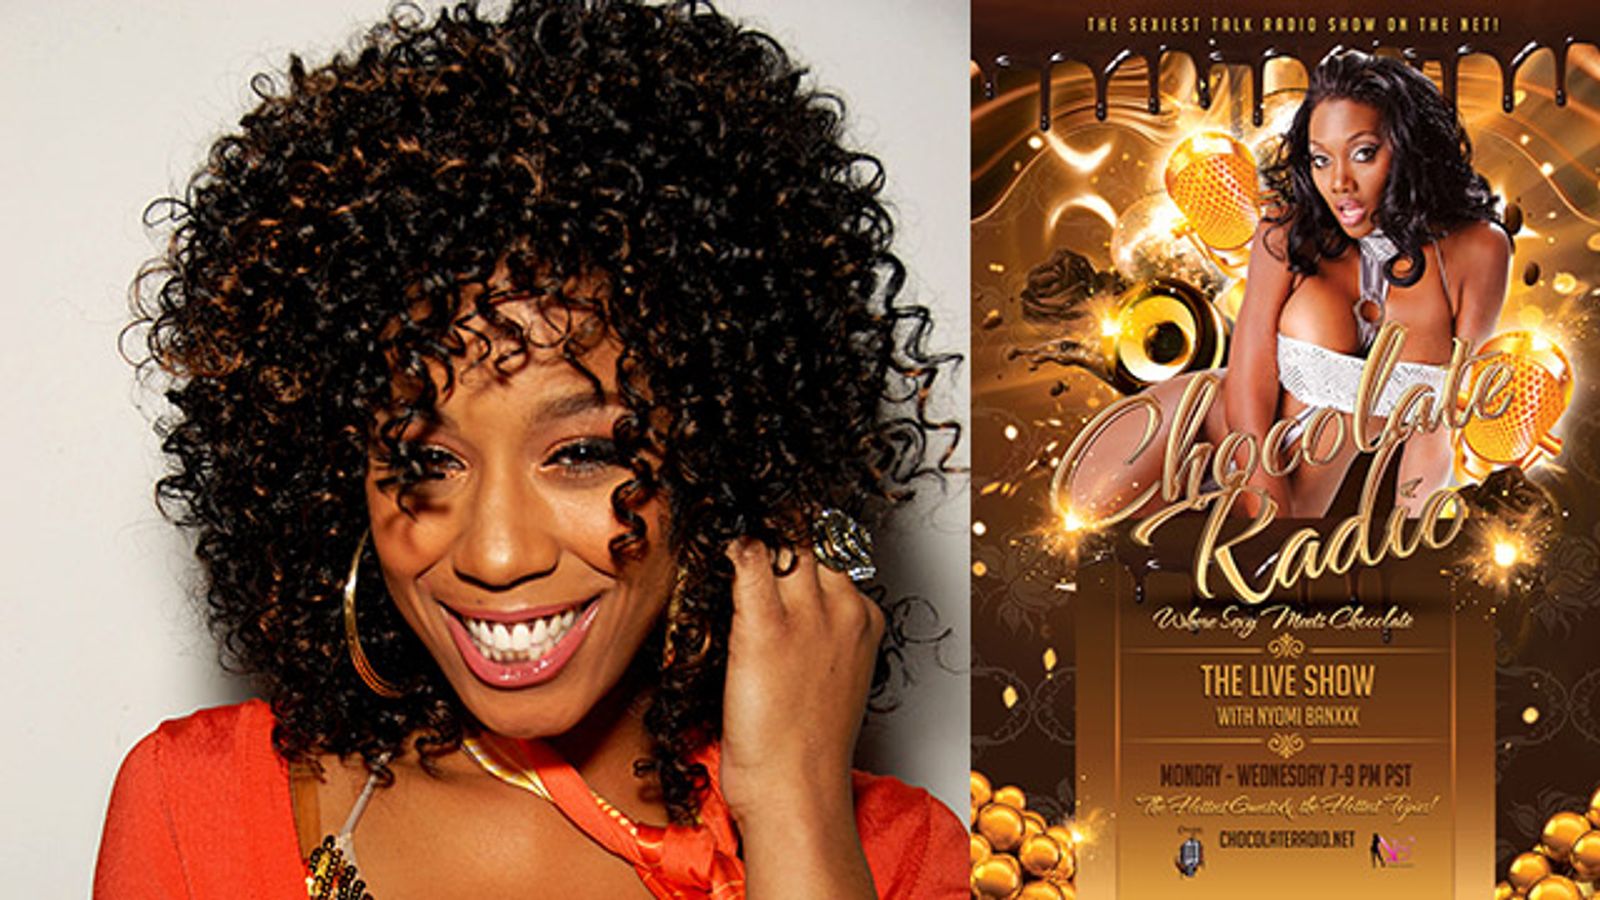 Misty Stone to Appear on Chocolate Radio’s ‘The Live Show’